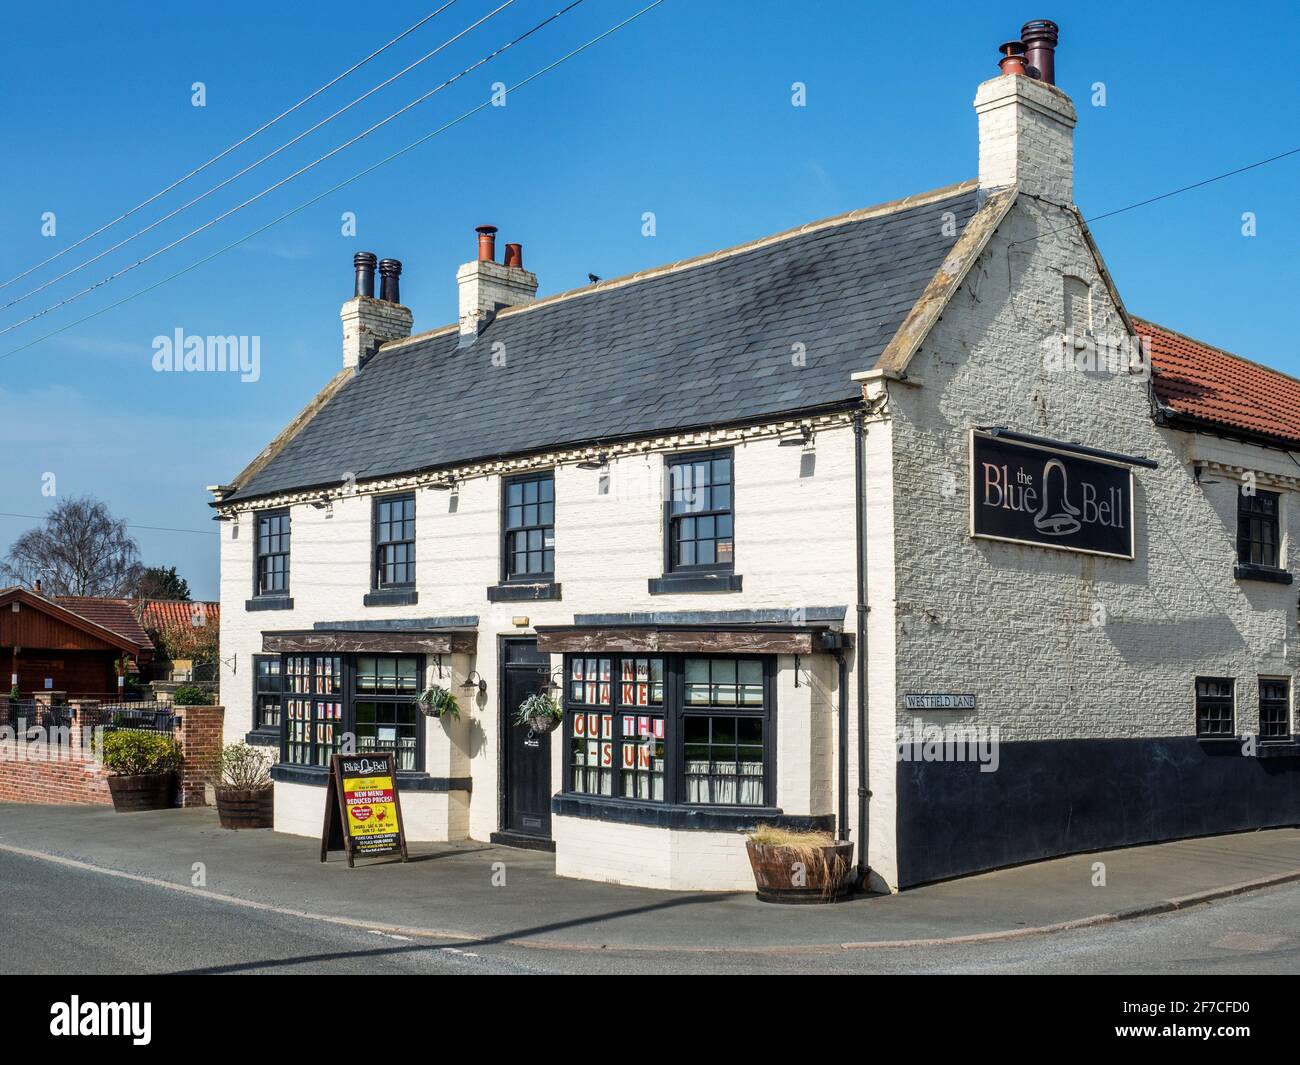 The Blue Bell public house in the village of Arkendale near Knaresborough North Yorkshire England Stock Photo